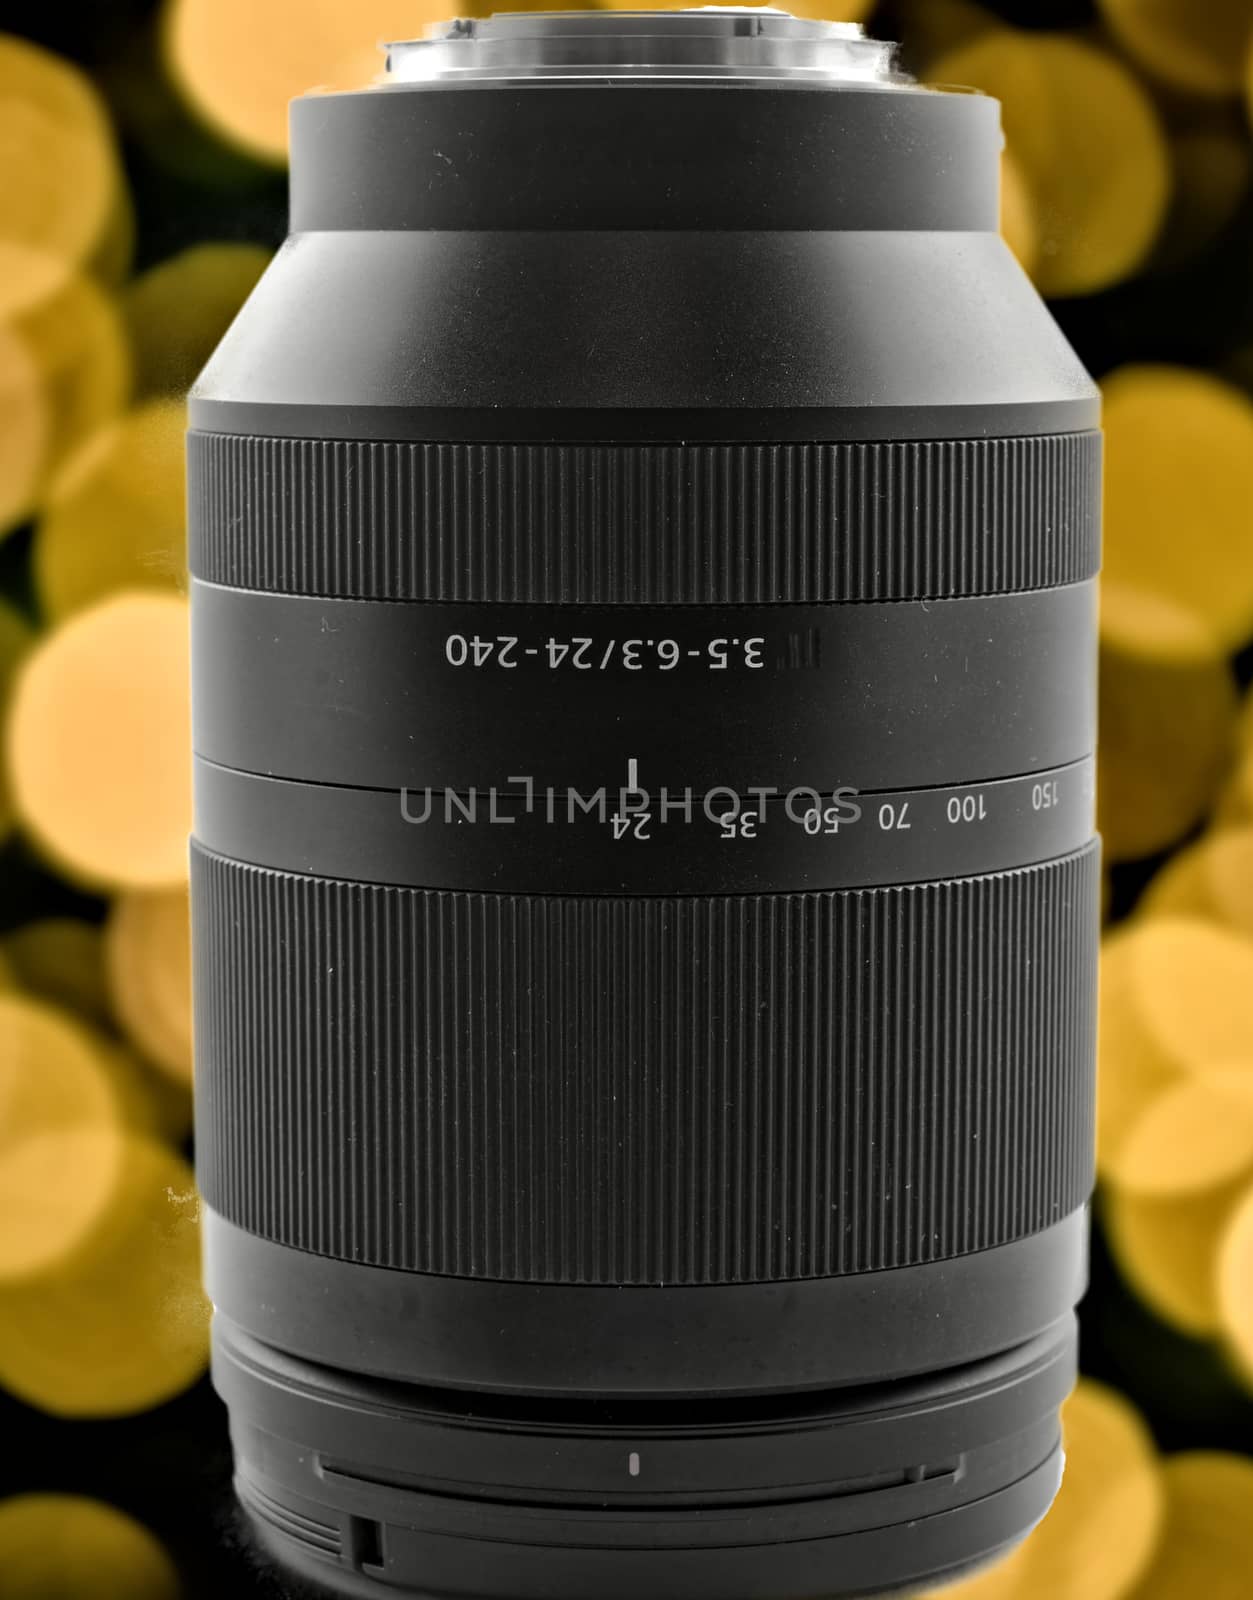 Zoom lens with a focal length of 24 to 240 mm in front of a background with yellow and orange bokeh.